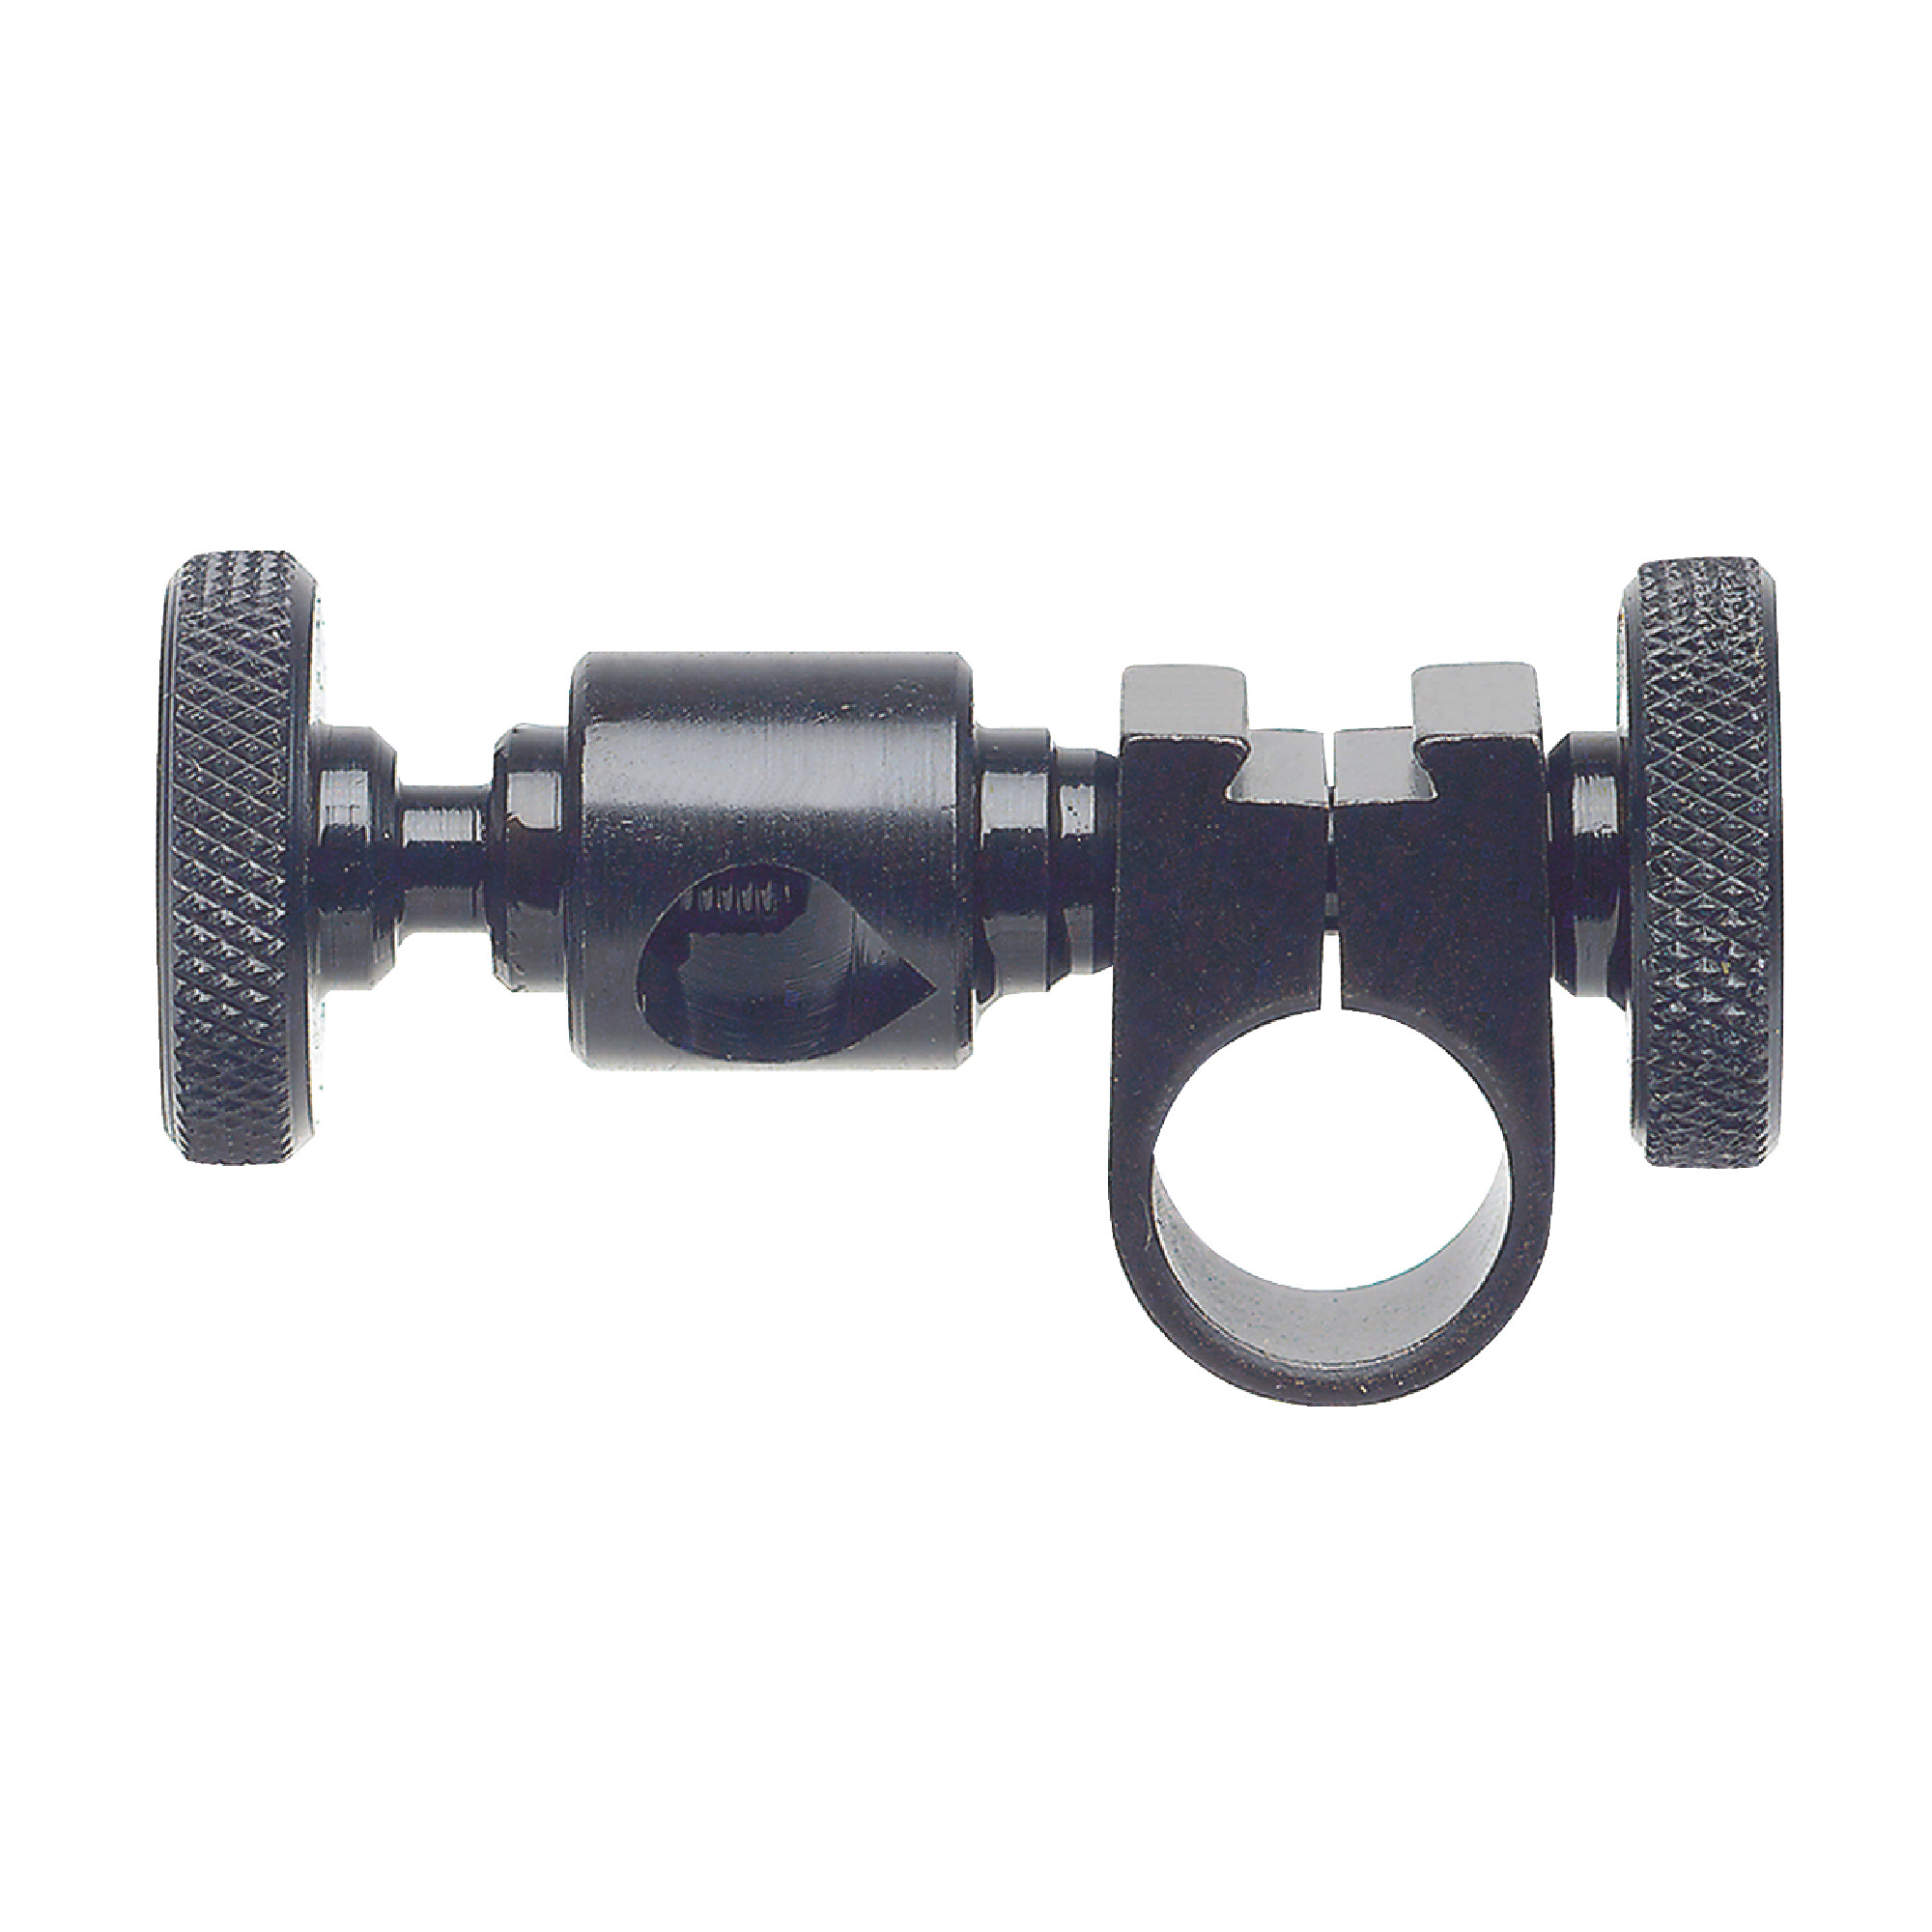 Universal Swivel Clamp for Dial Test Indicator